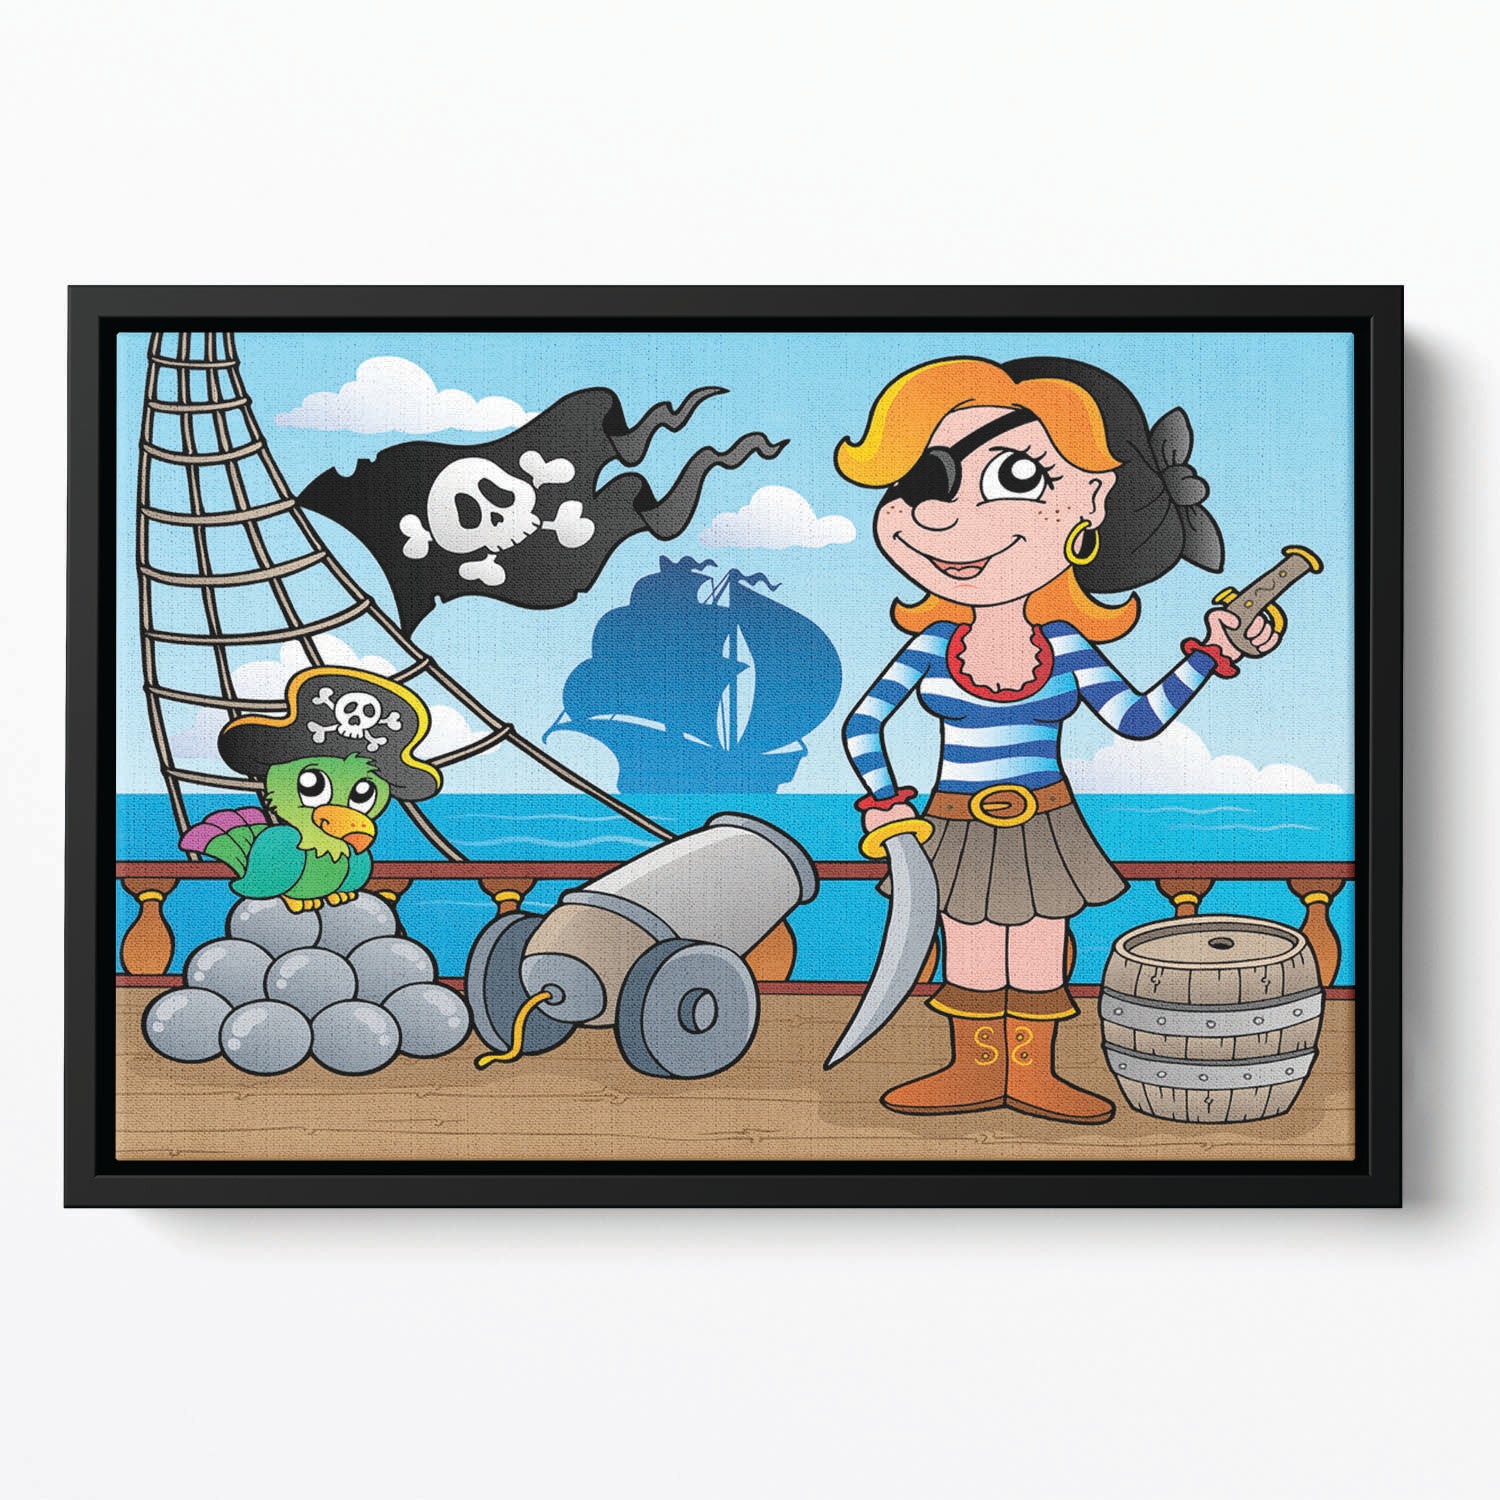 Pirate ship deck theme 8 Floating Framed Canvas